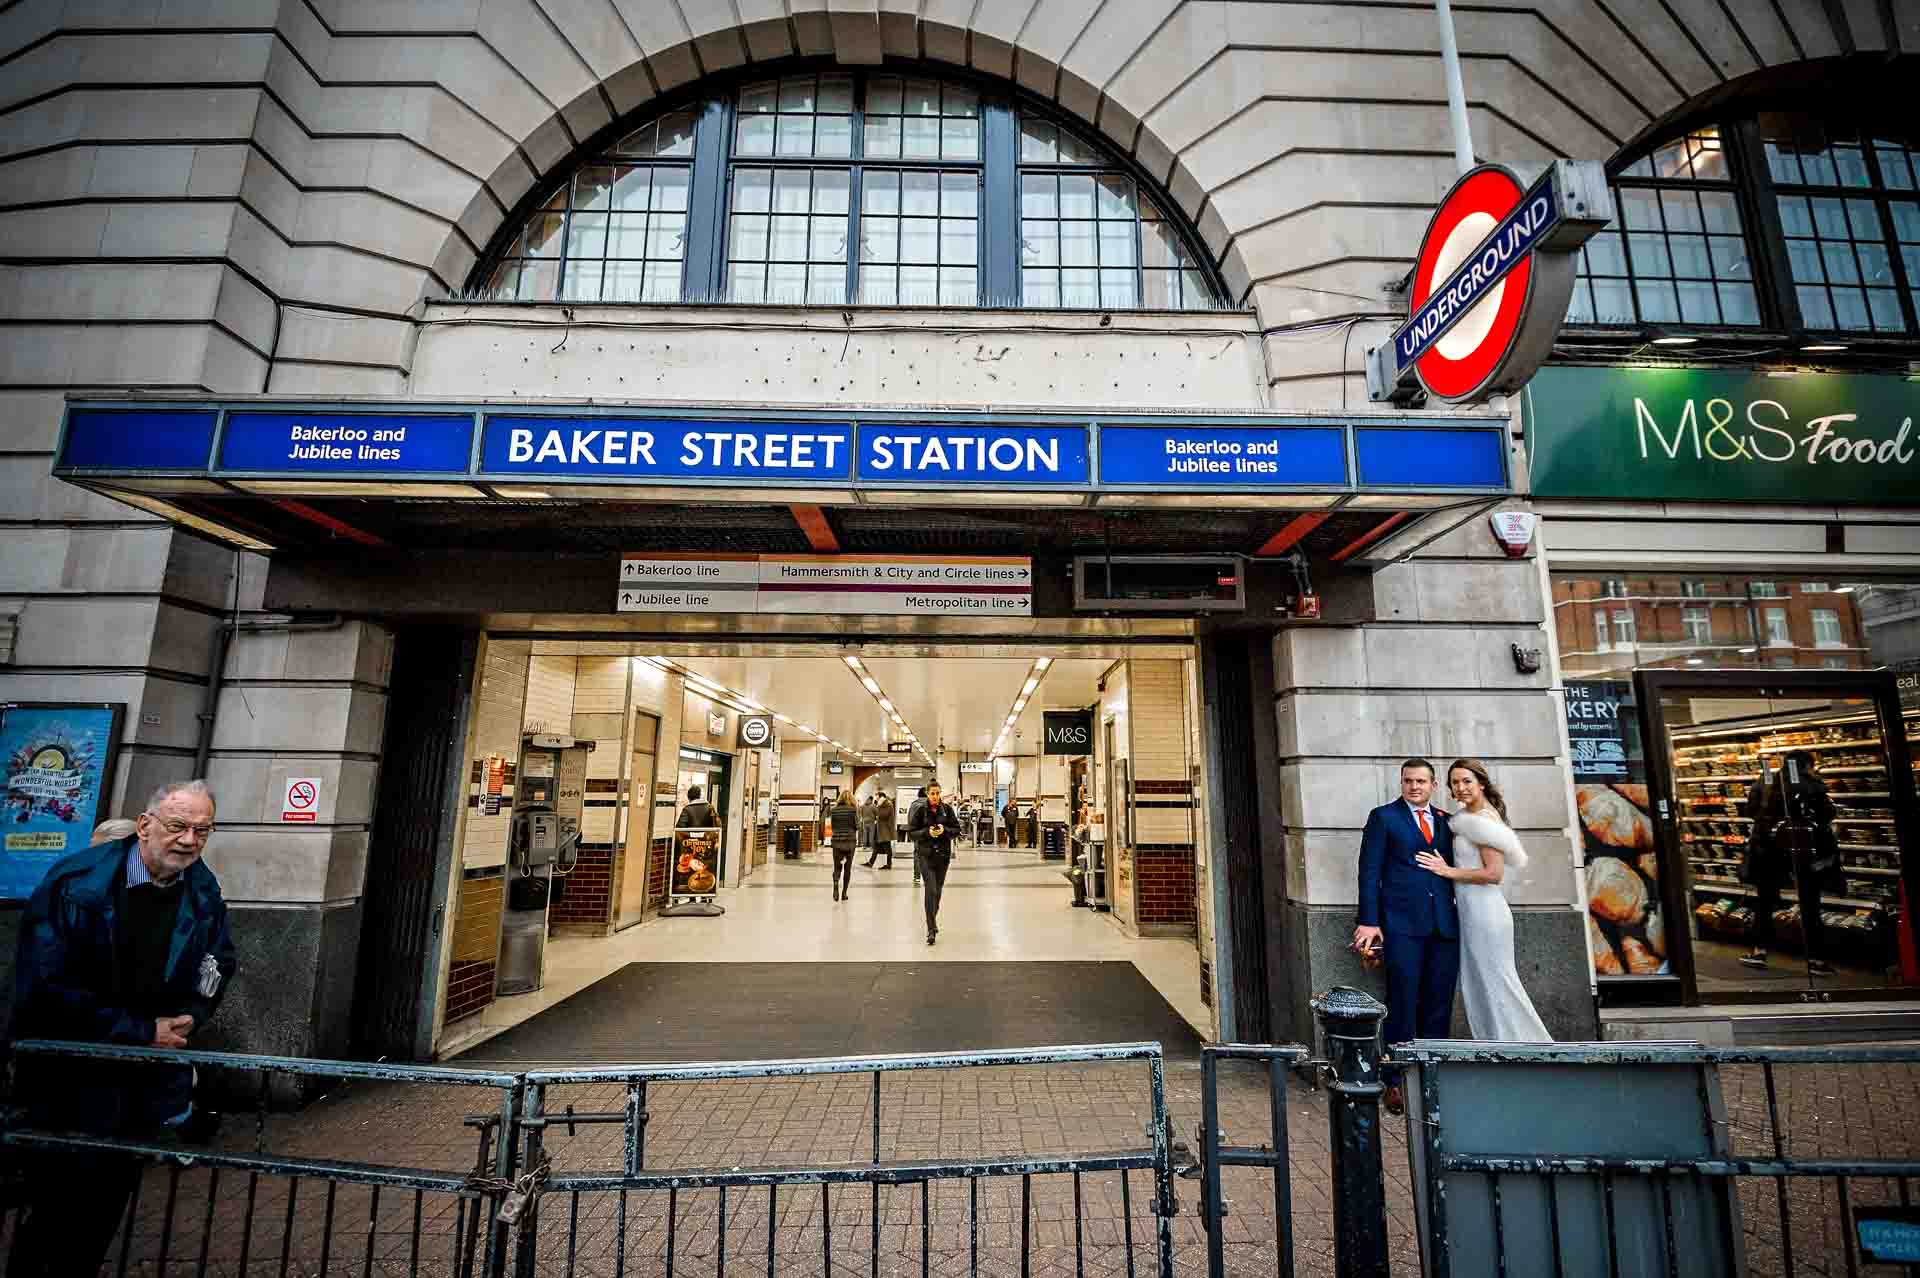 Wedding couple standing in front of Baker Street Station in London